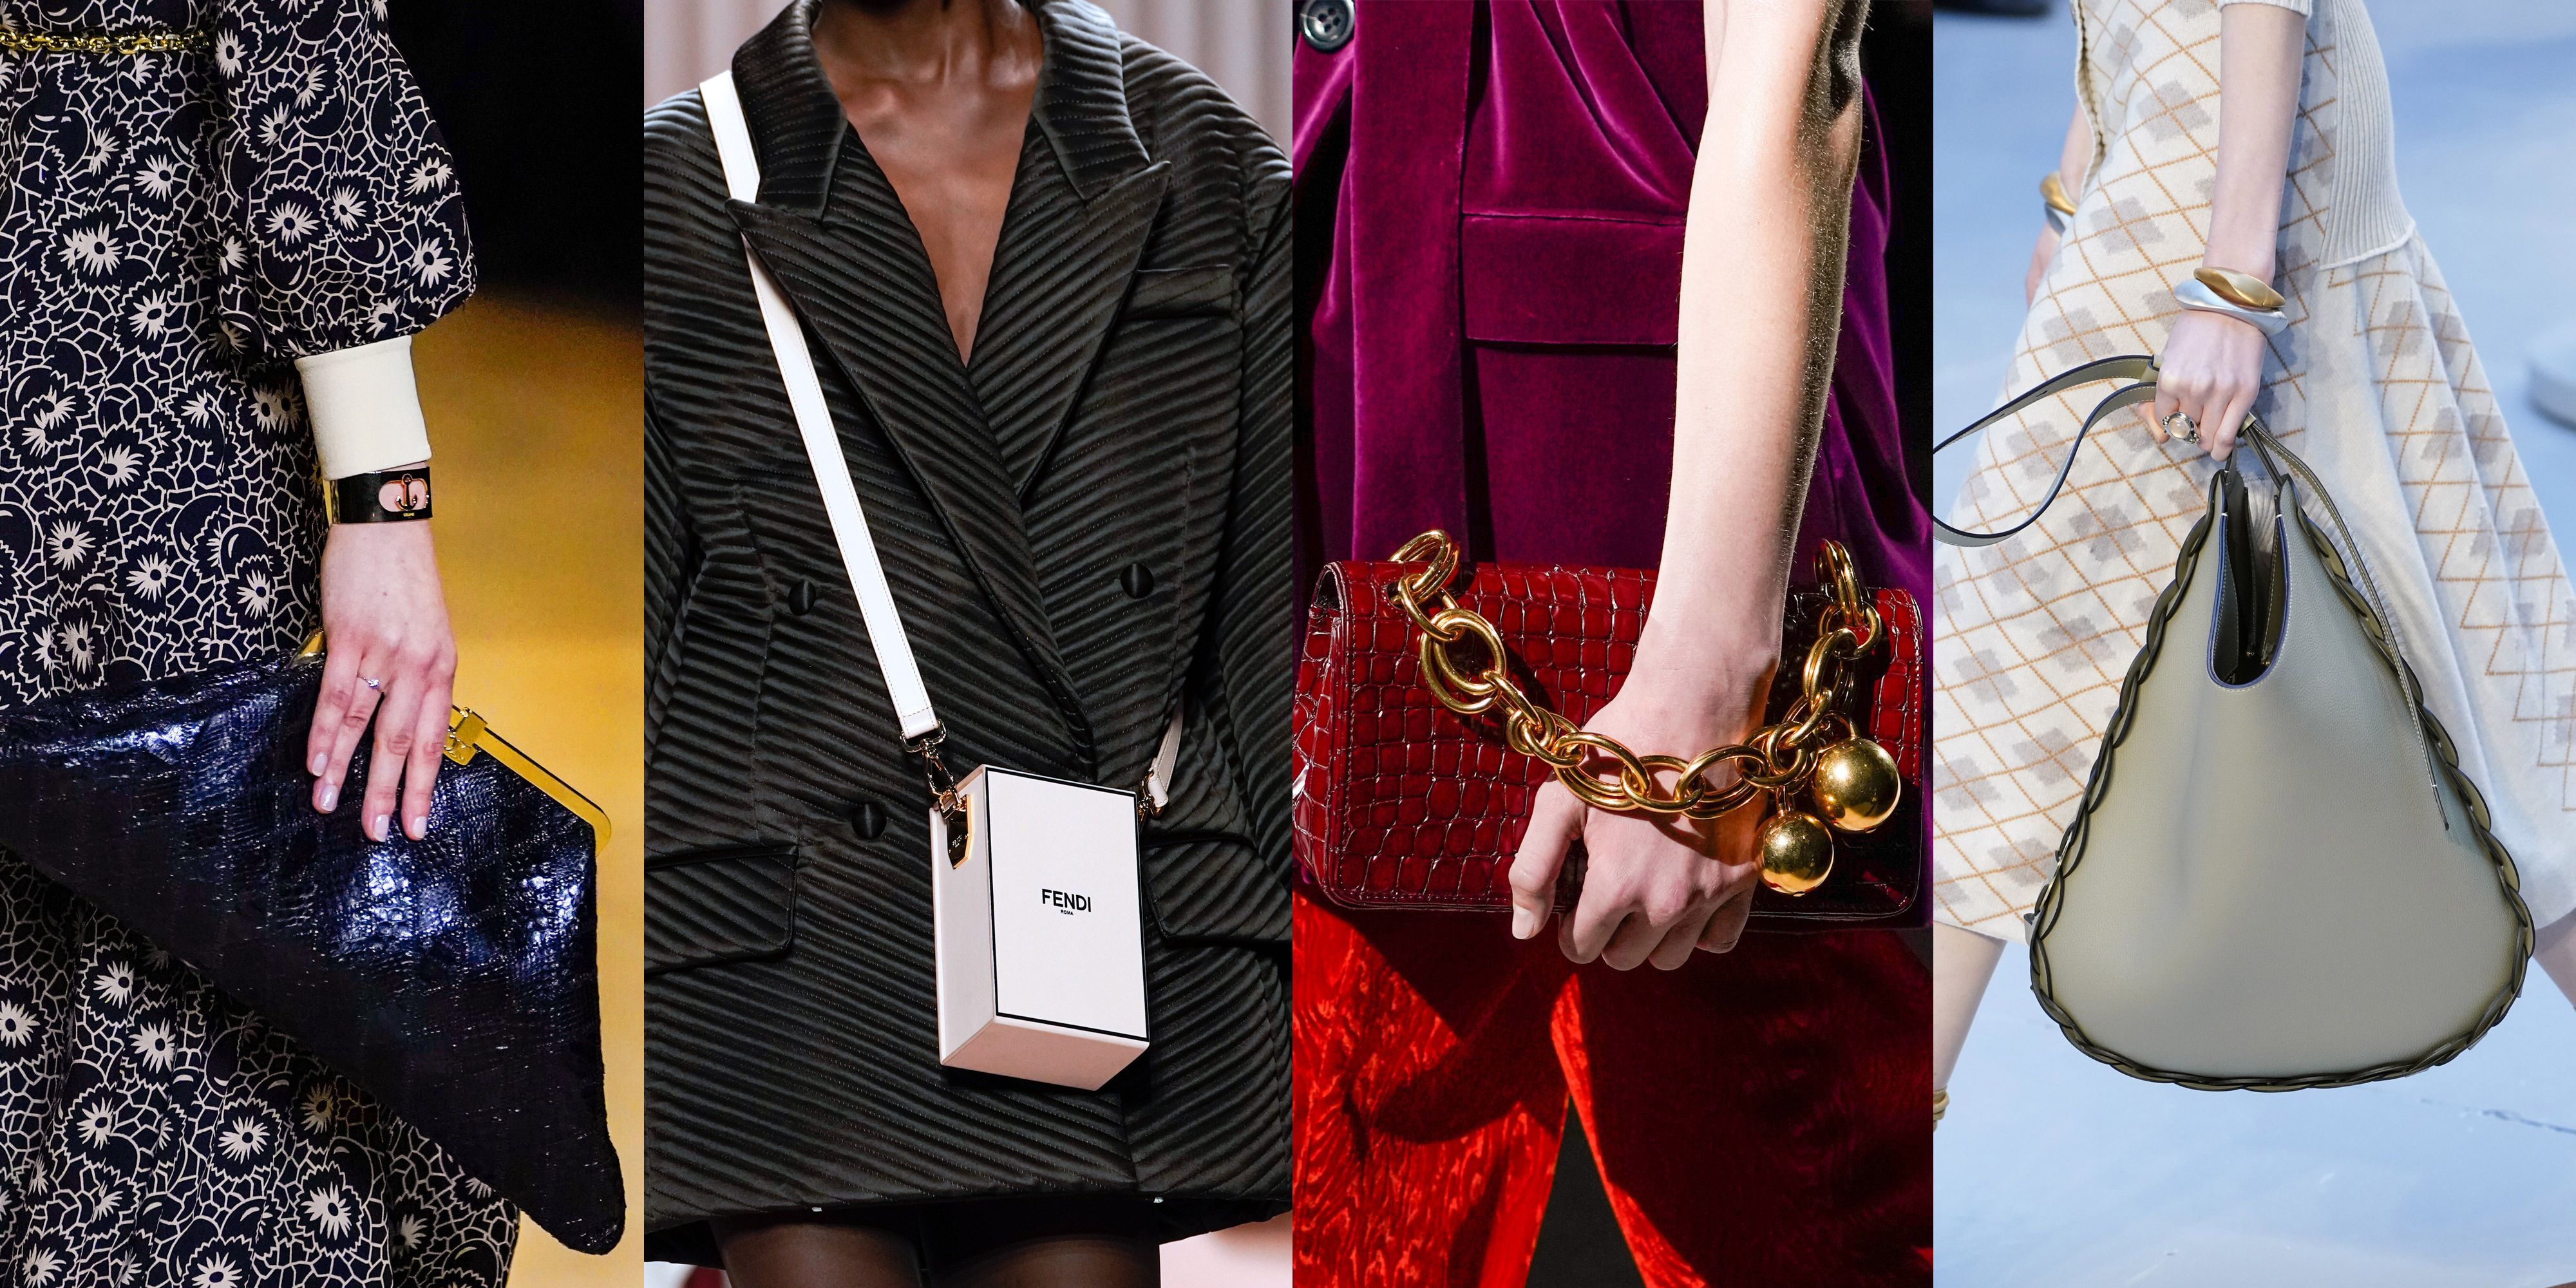 Sale > necklace bag trend > in stock